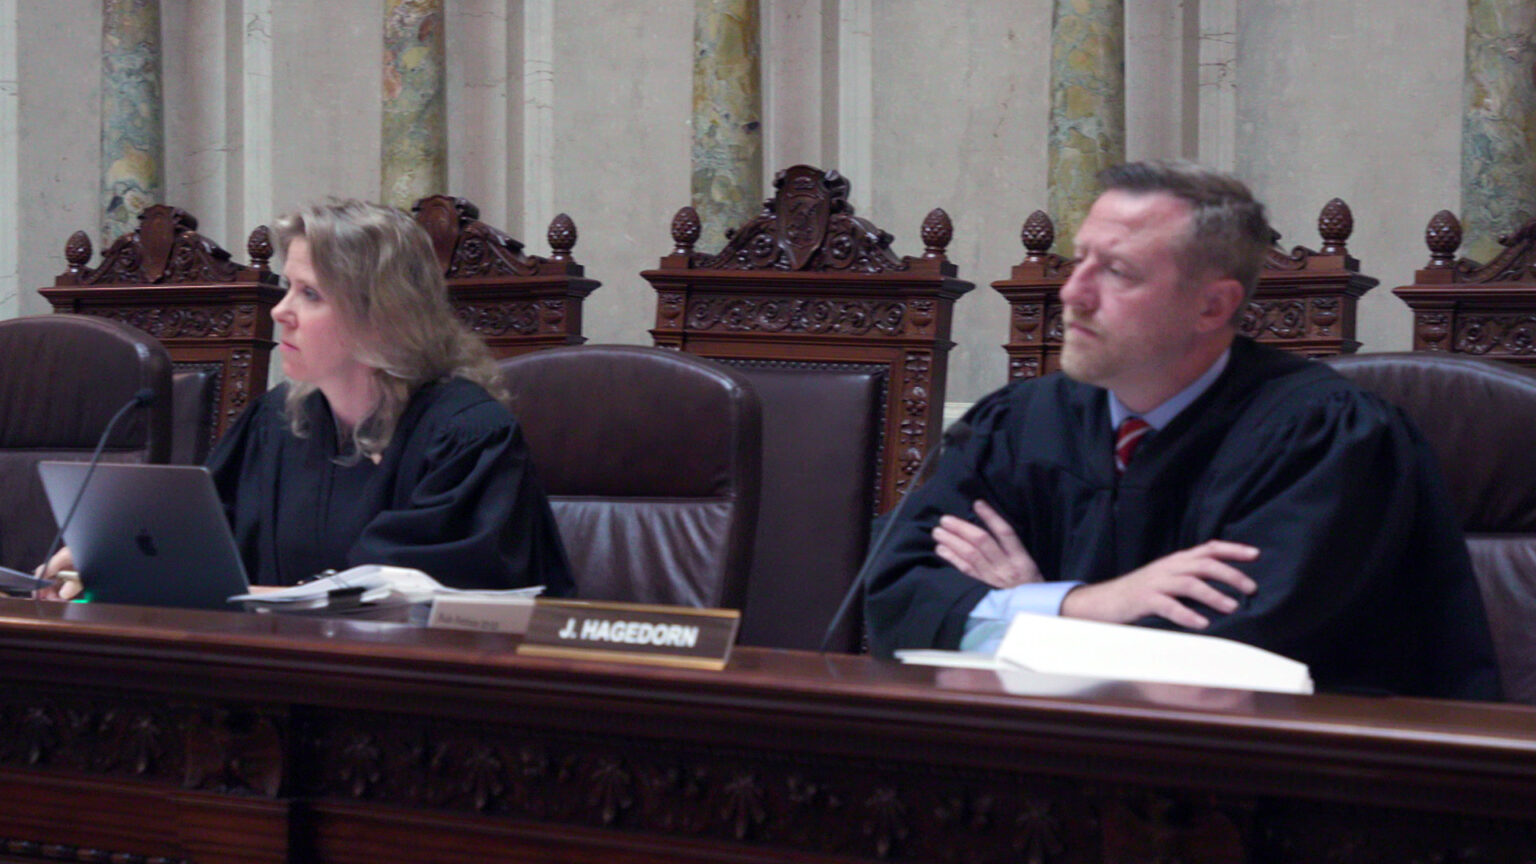 Rebecca Bradley and Brian Hagedorn sit in high-backed leather chairs at a judicial bench with a nameplate reading J. Hagedorn, with a row of empty high-backed wood and leather chairs behind them in a room with marble pillars and masonry.